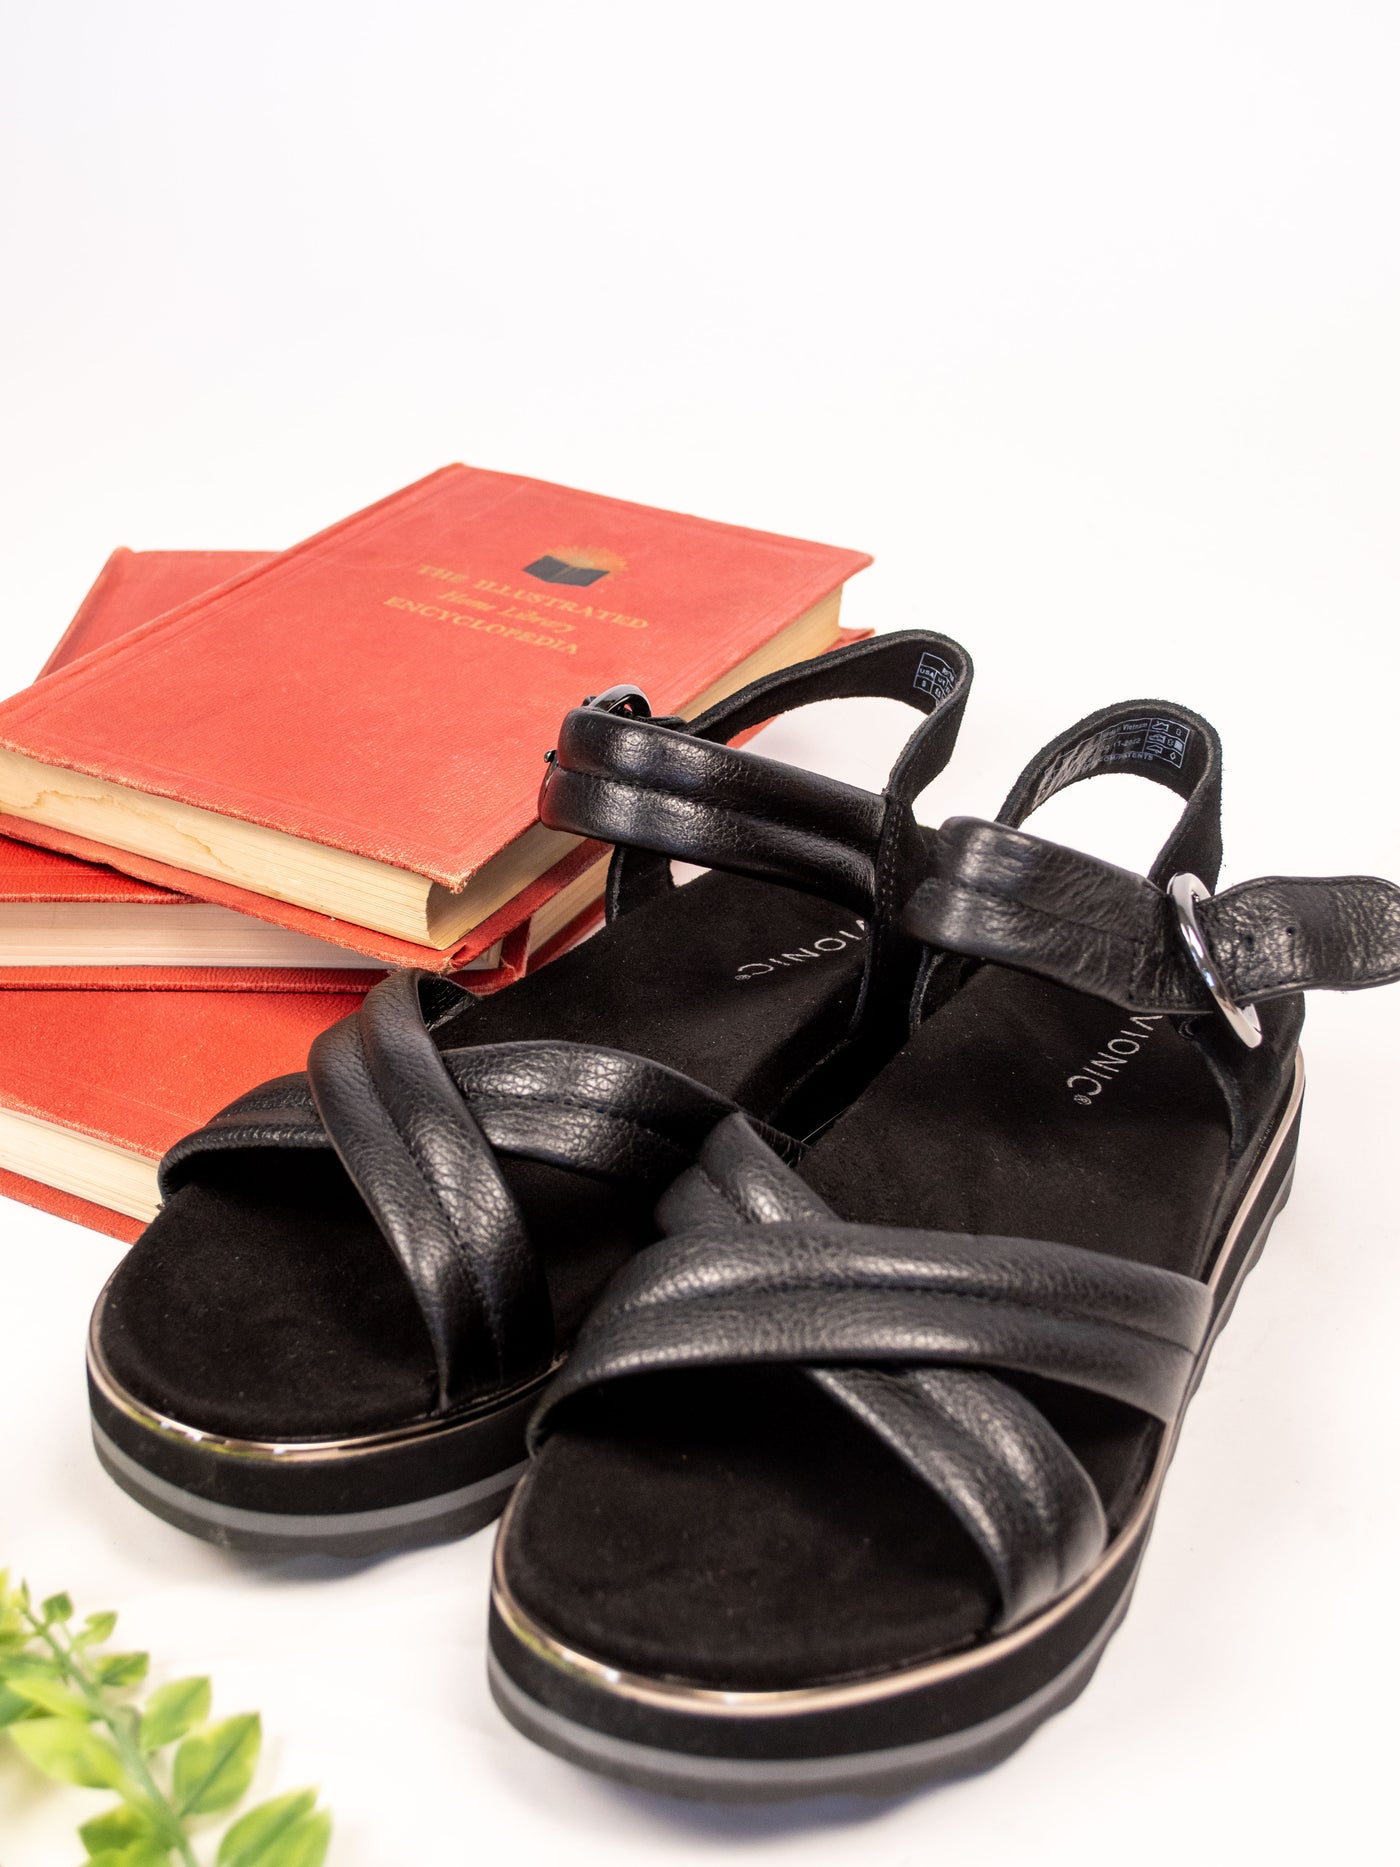 A pair of black flatworm sandal with cross foot straps on the front and adjustable back straps.